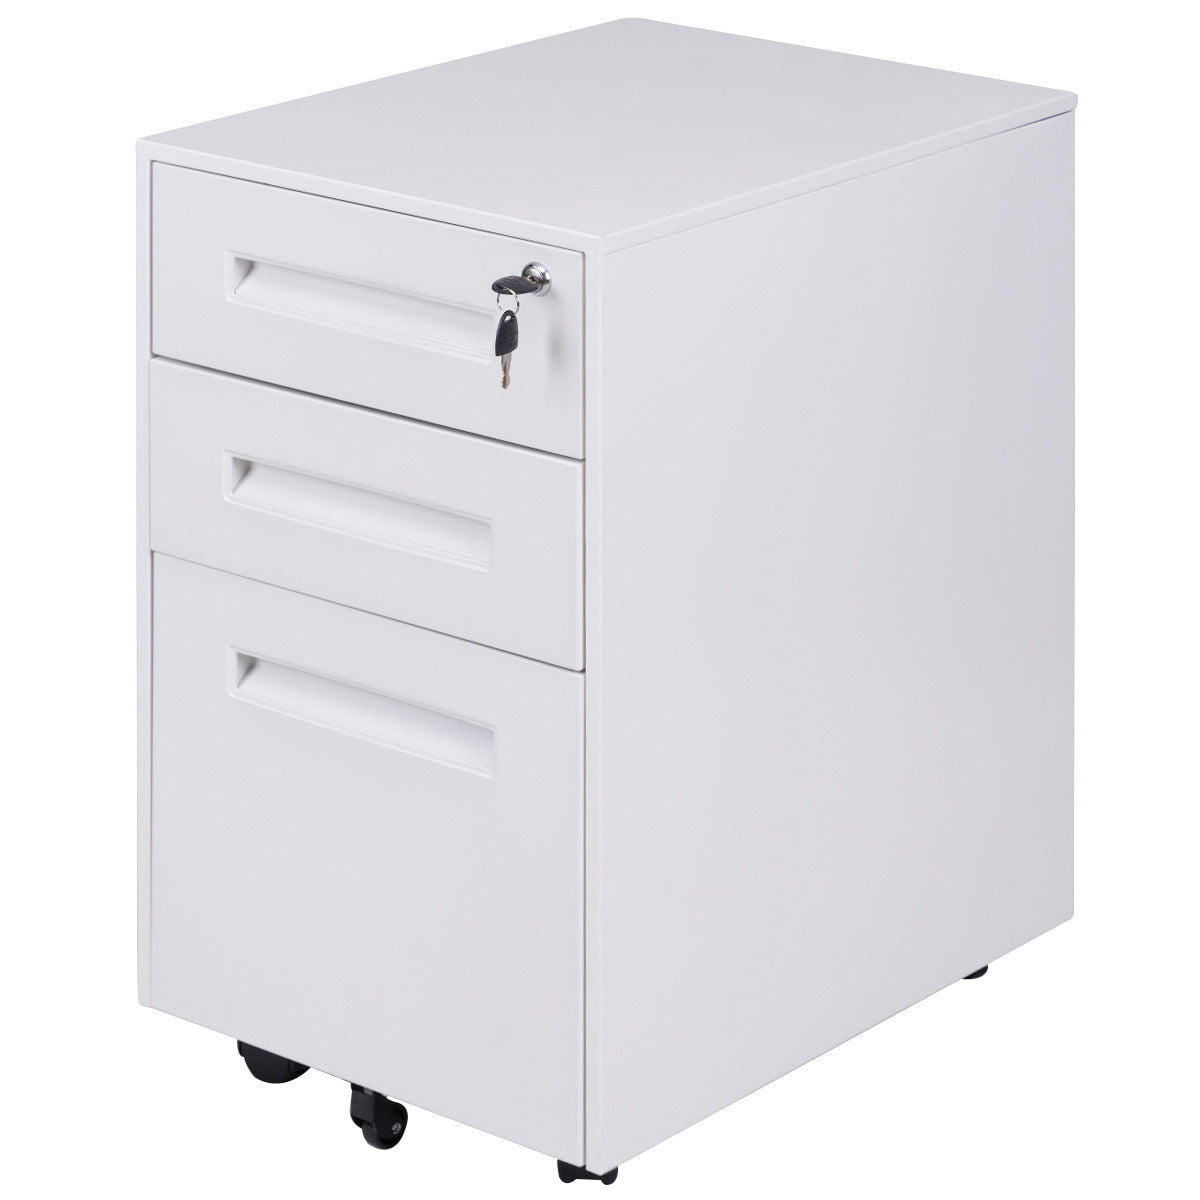 FILE-MB01W Rolling Pedestal Storage Cabinet on Wheels VIVO White Steel 3 Drawer Mobile Office File Cabinet with Lock